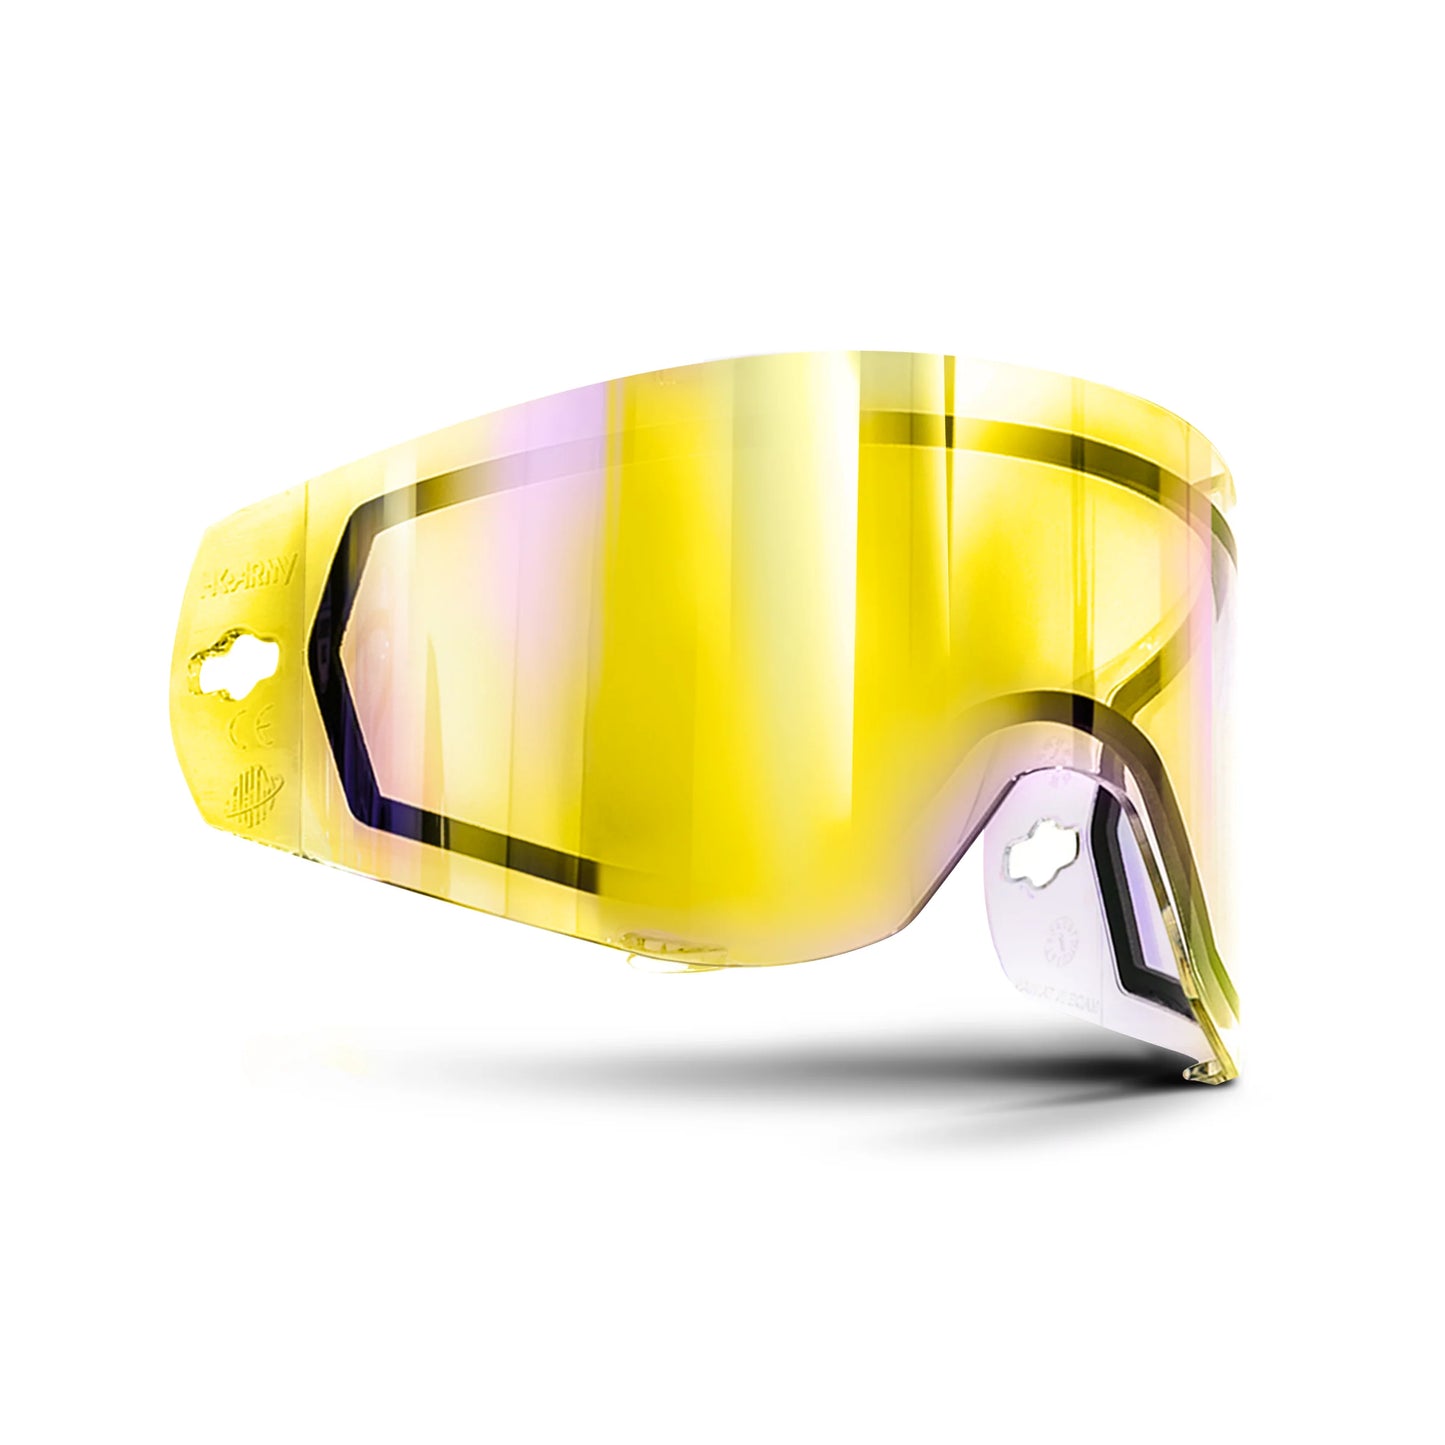 HSTL Goggle - Thermal Lens